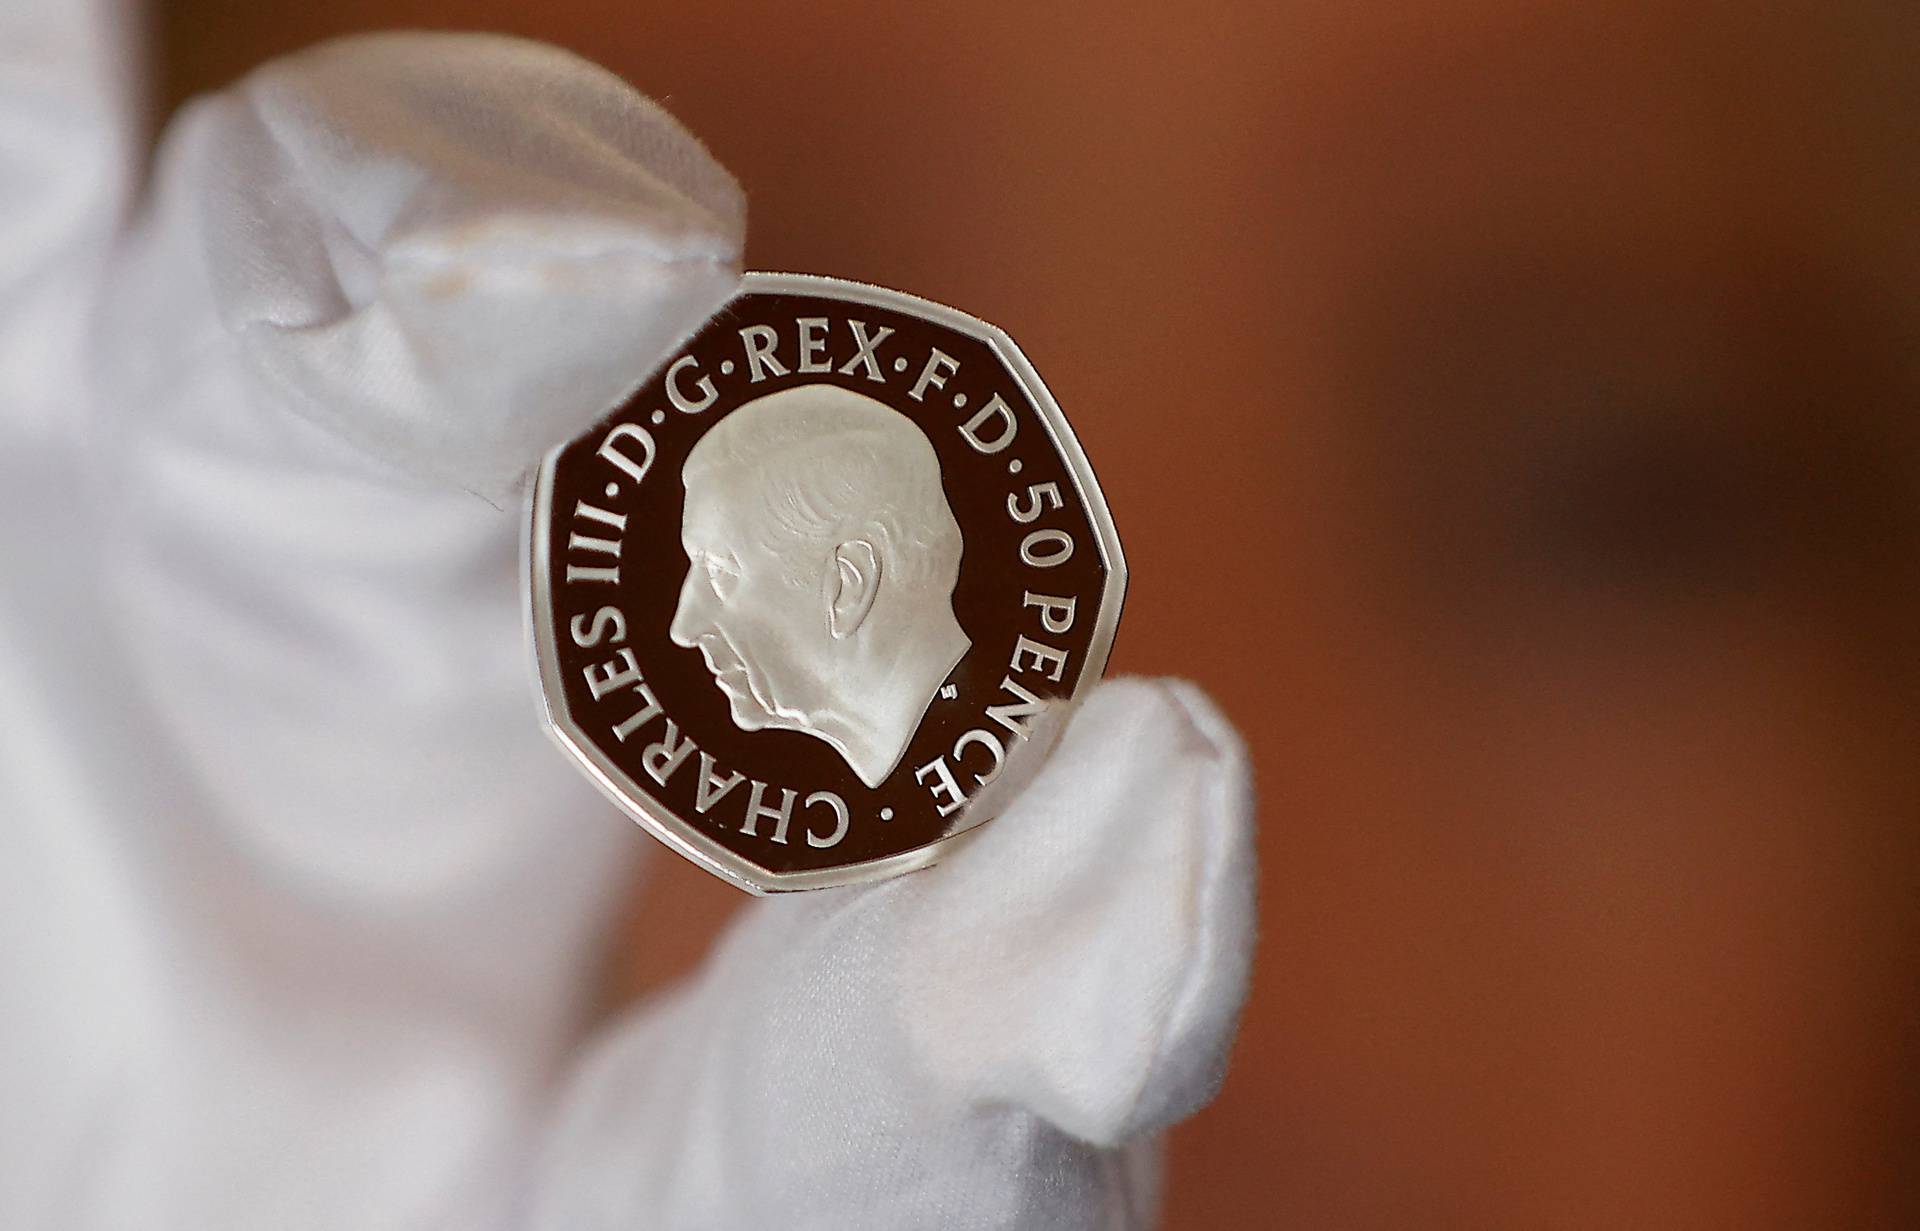 The official coin effigy of Britain’s King Charles III is seen on a 50 pence coin, unveiled by The Royal Mint, in London